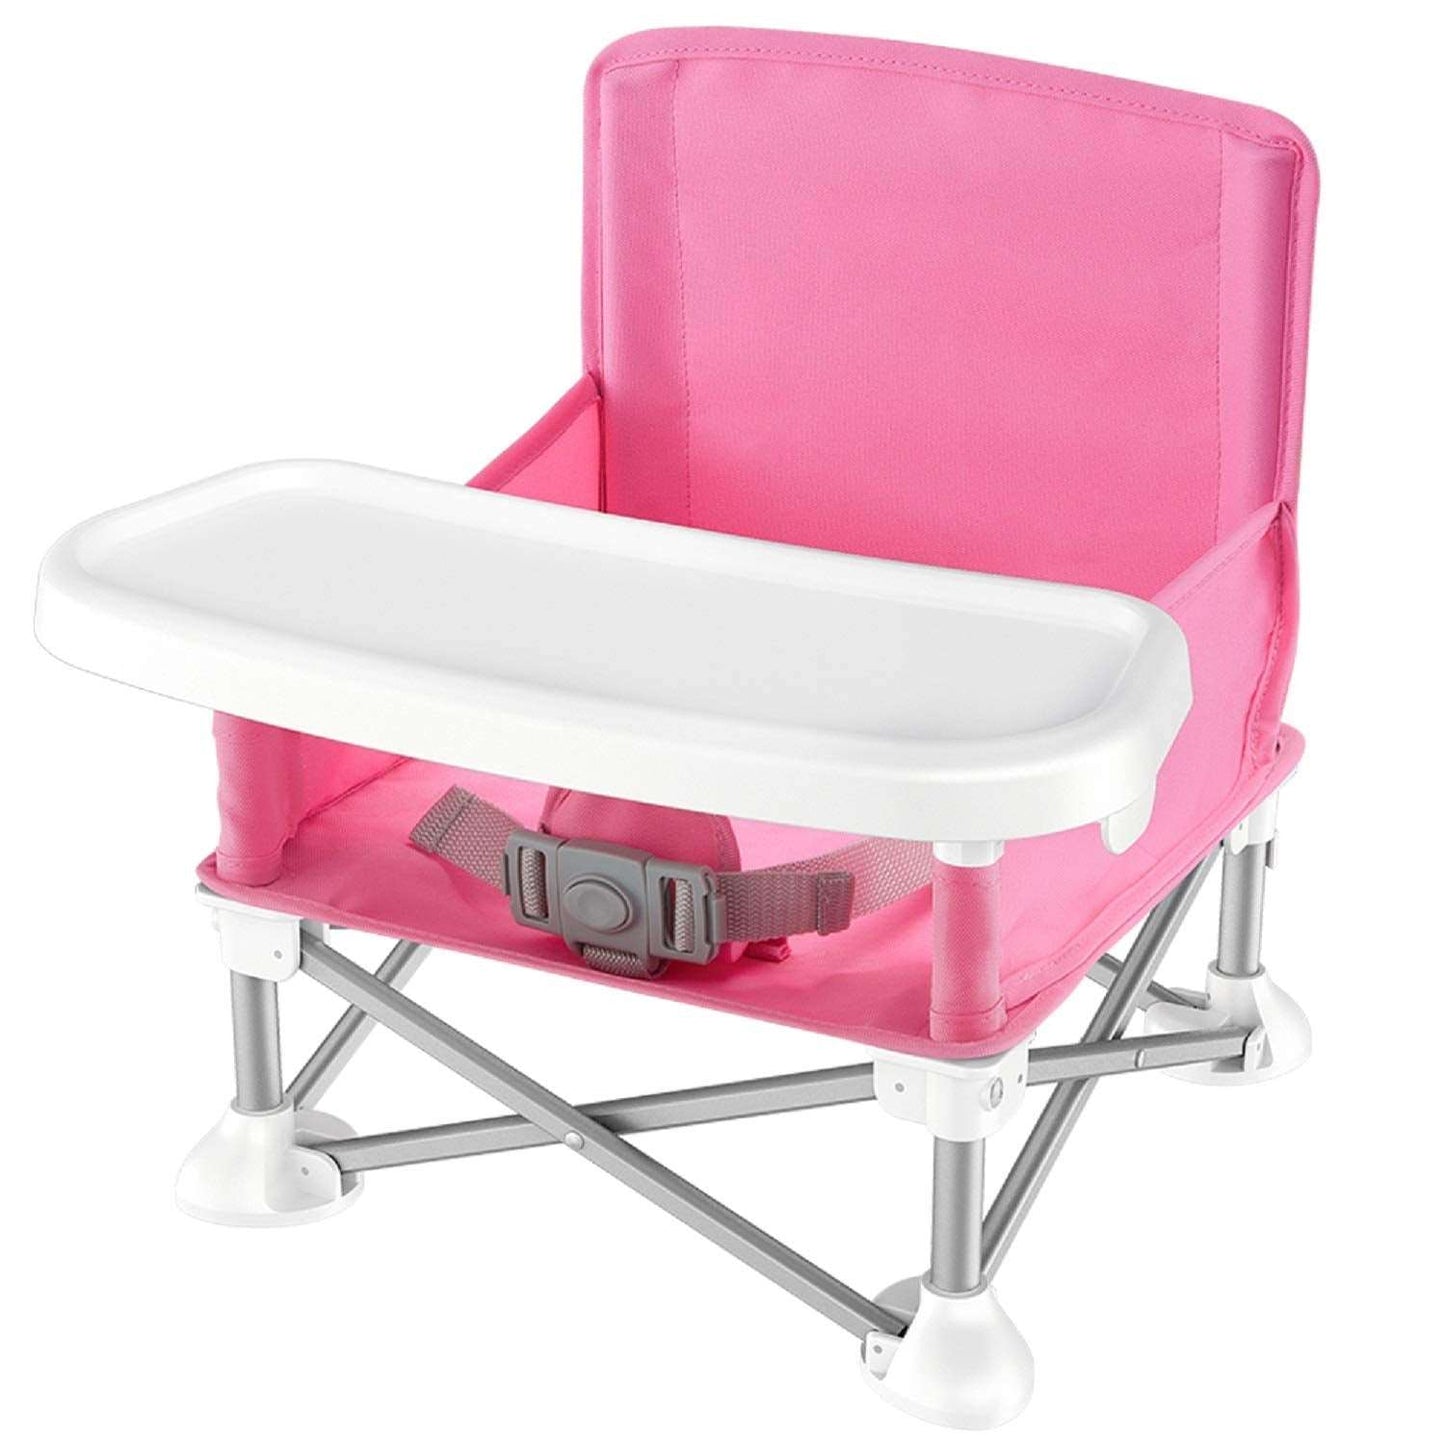 Baby Booster Seat - Chai "Travel-Light" Baby Booster Seat